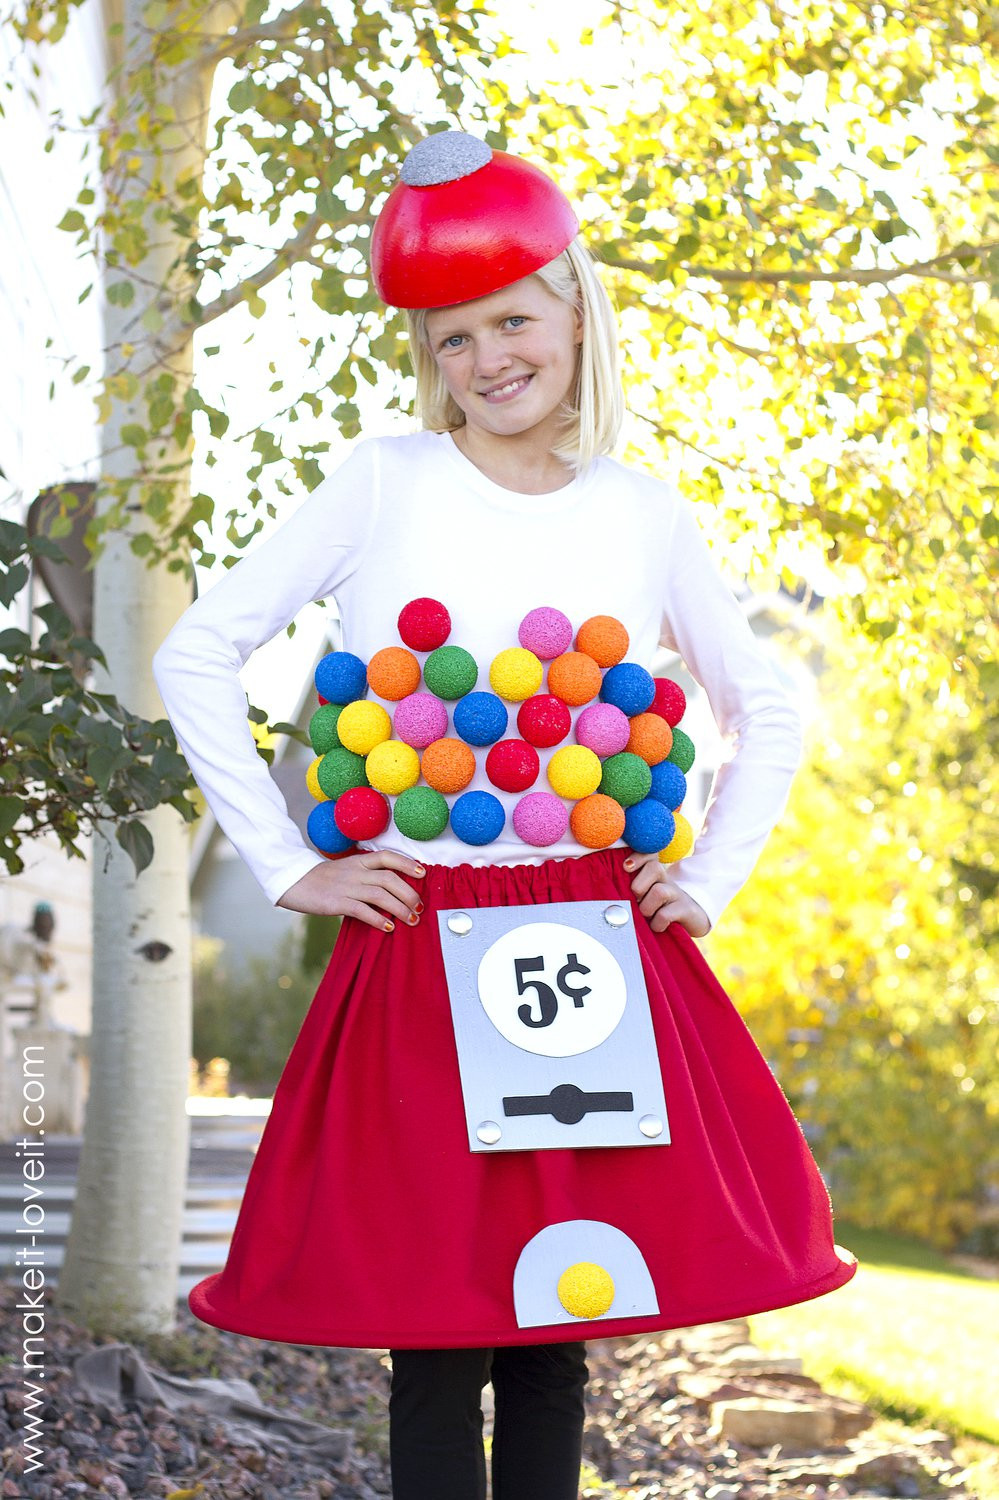 Creative Halloween Costume Ideas
 38 of the most CLEVER & UNIQUE Costume Ideas